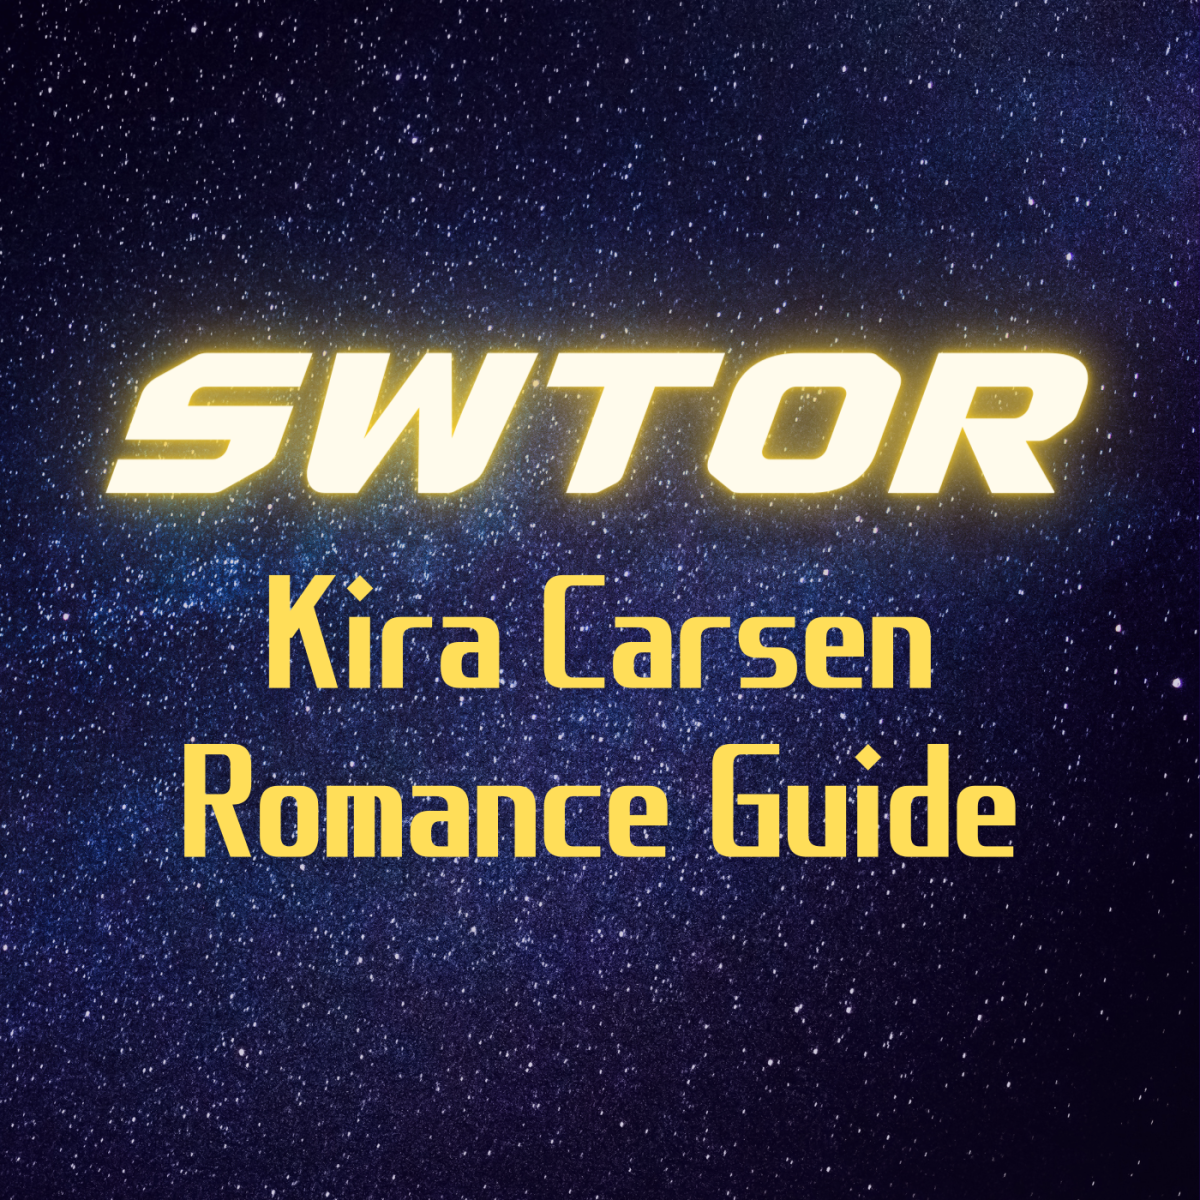 Discover how to start a romance with the companion Kira Carsen in "SWTOR"!